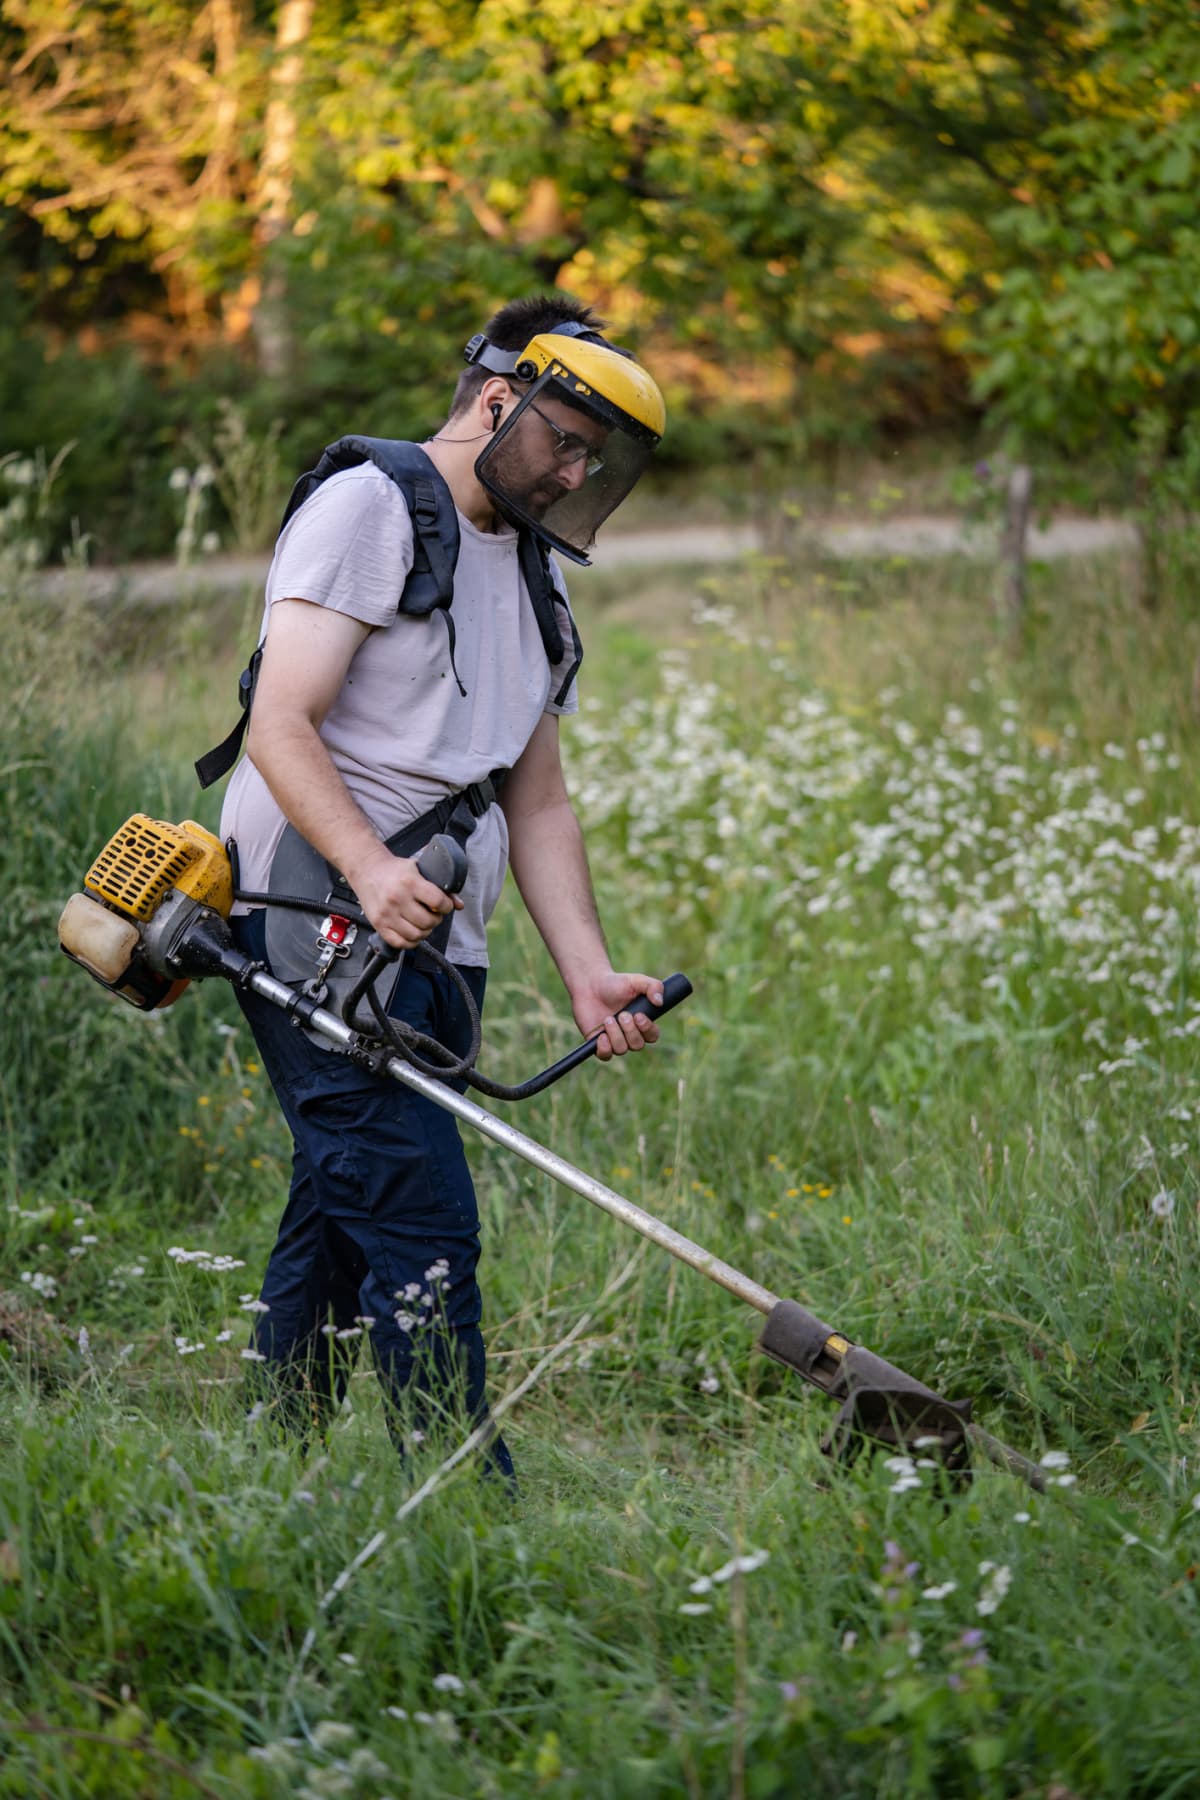 Man trims grass with power tool